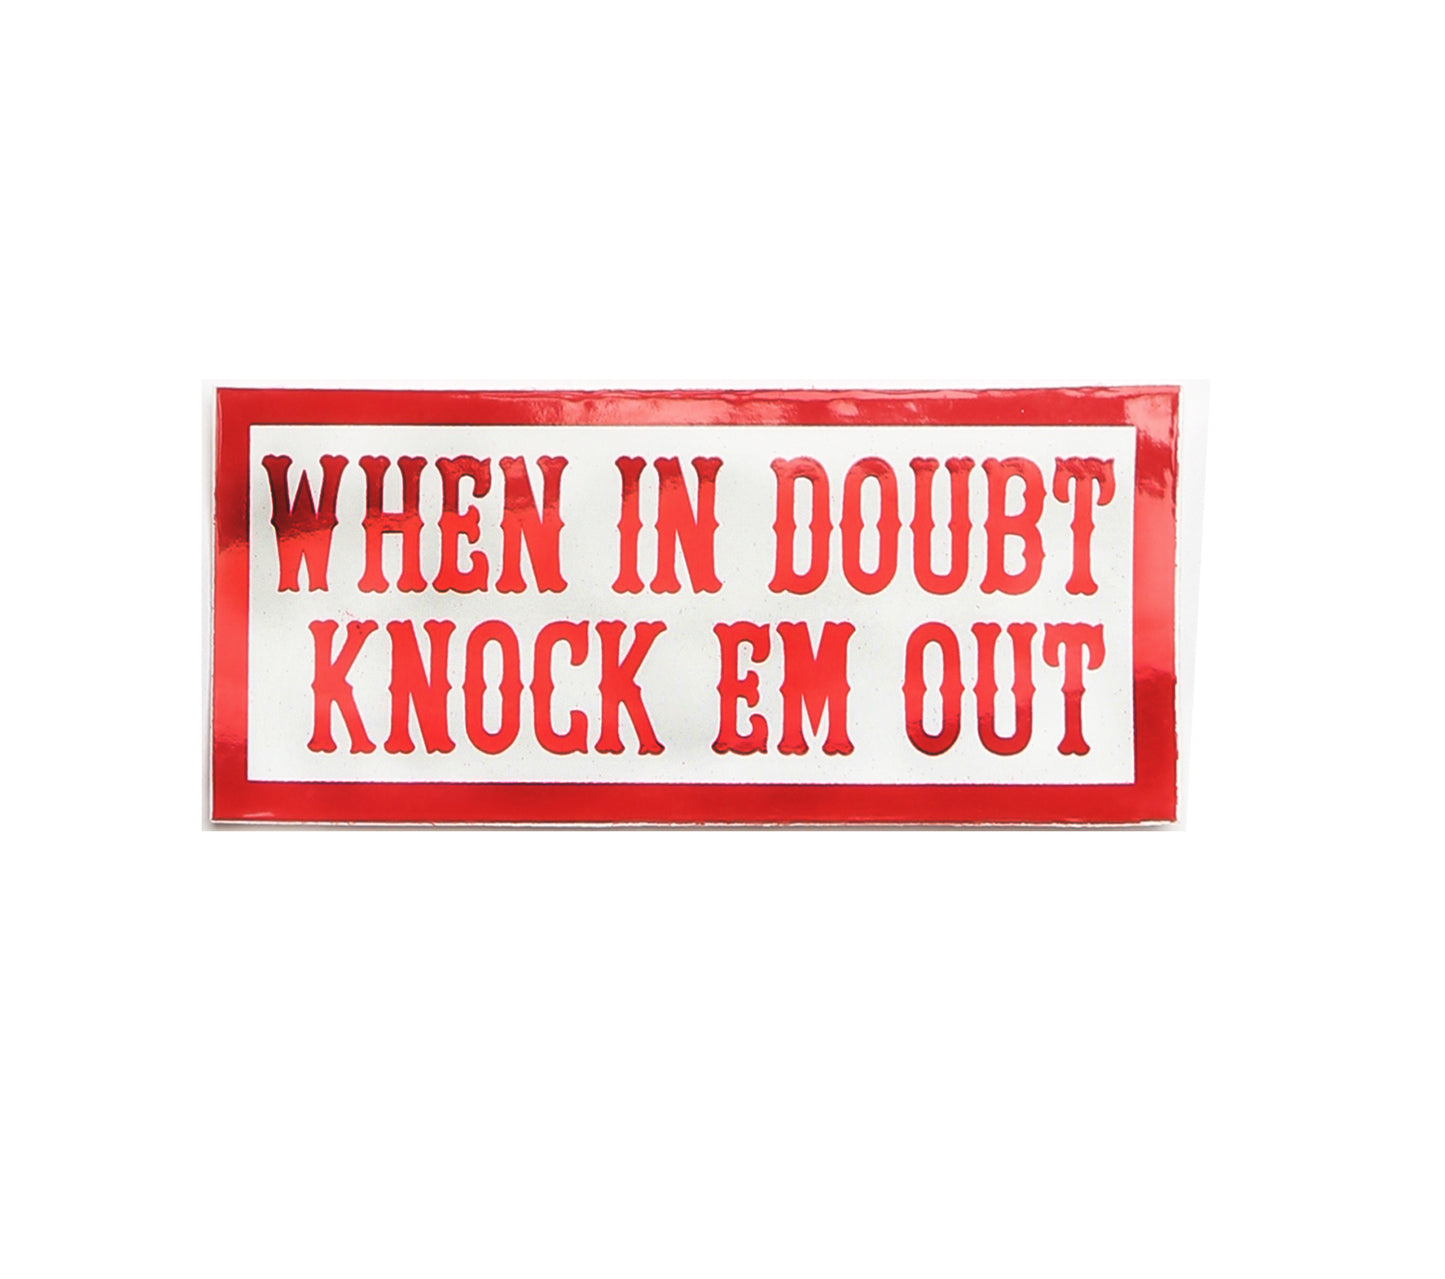 Sticker - WHEN IN DOUBT KNOCK EM OUT